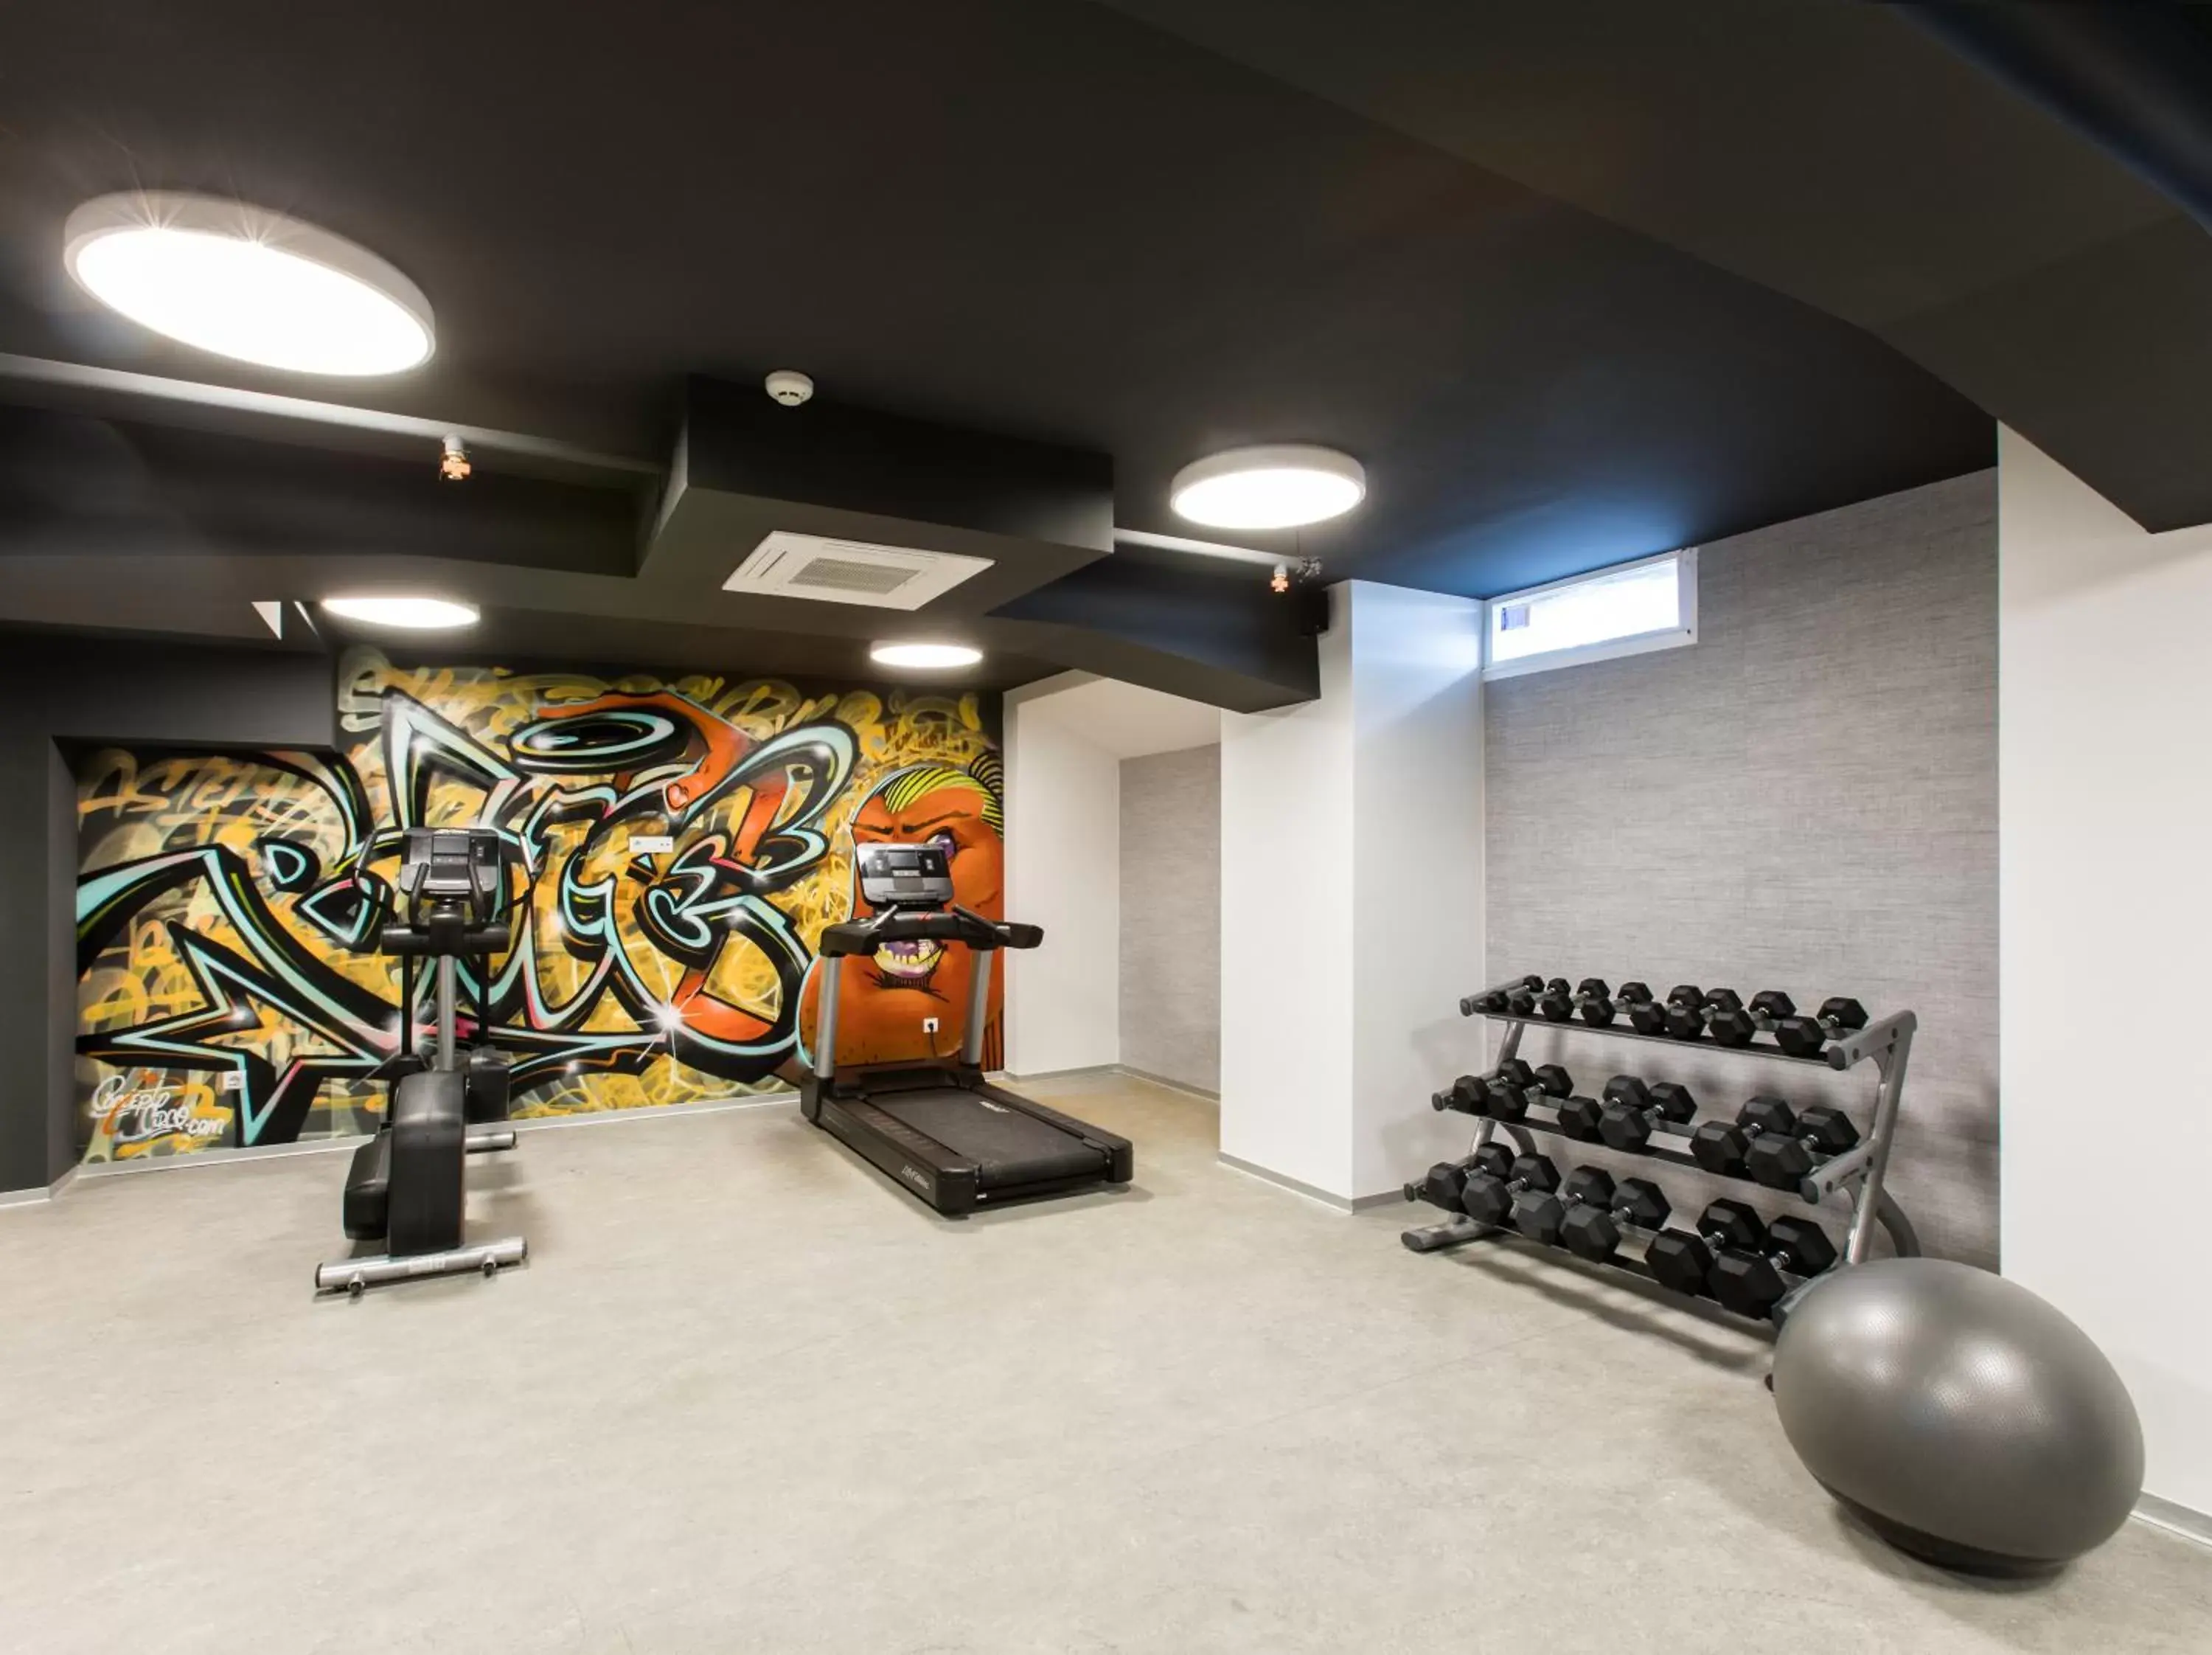 Fitness centre/facilities, Fitness Center/Facilities in Hotel Riazor